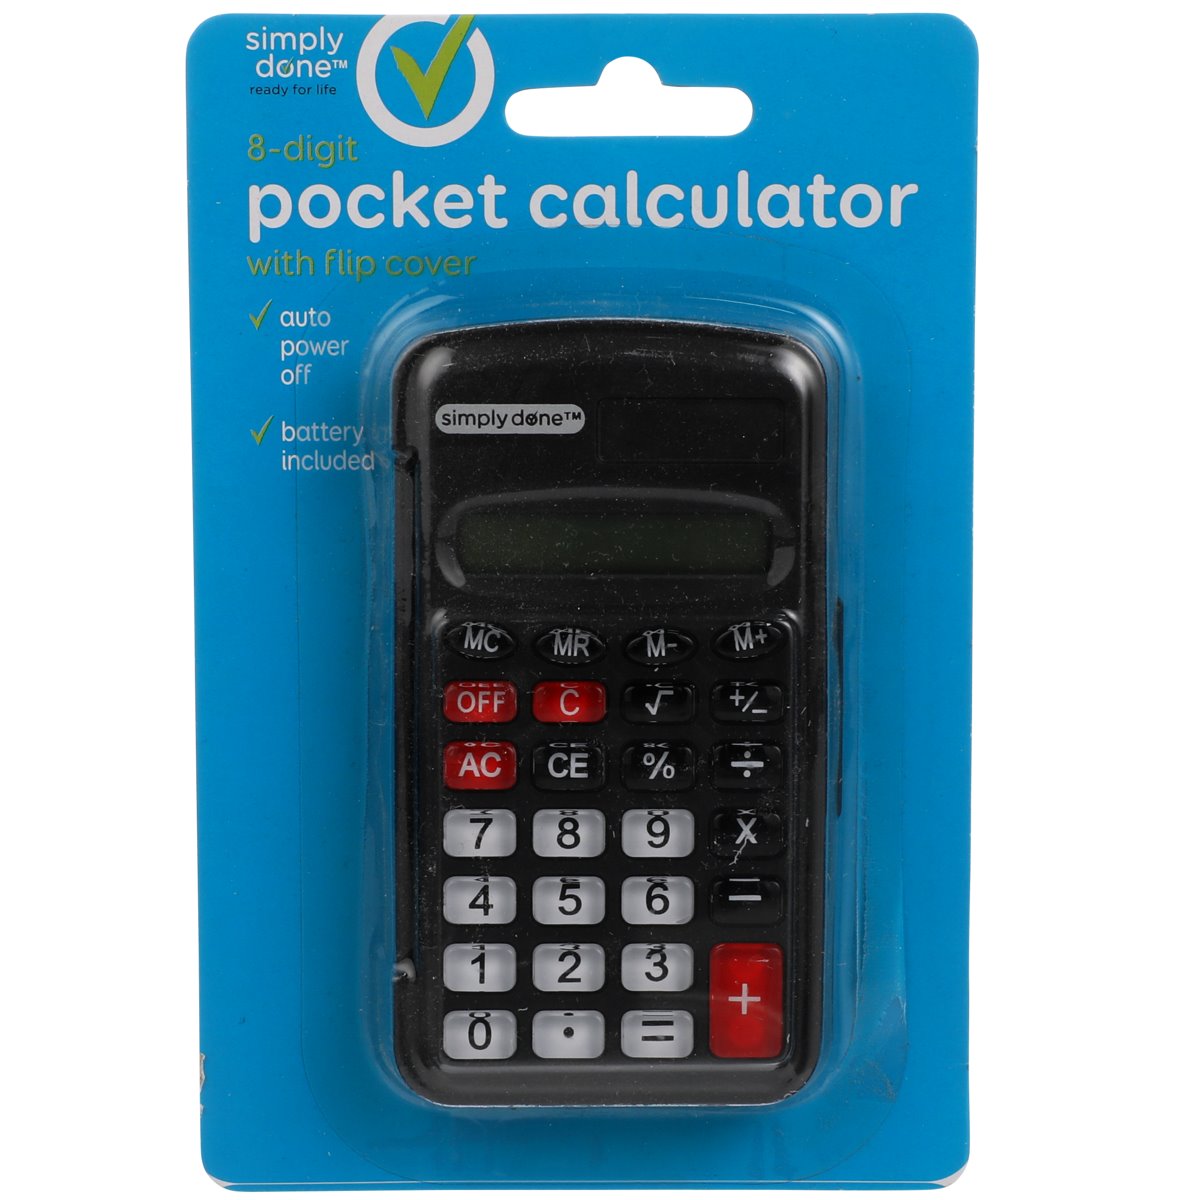 expedition half past seven only Order Acme - Simply Done Calculator, Pocket, 8-Digit